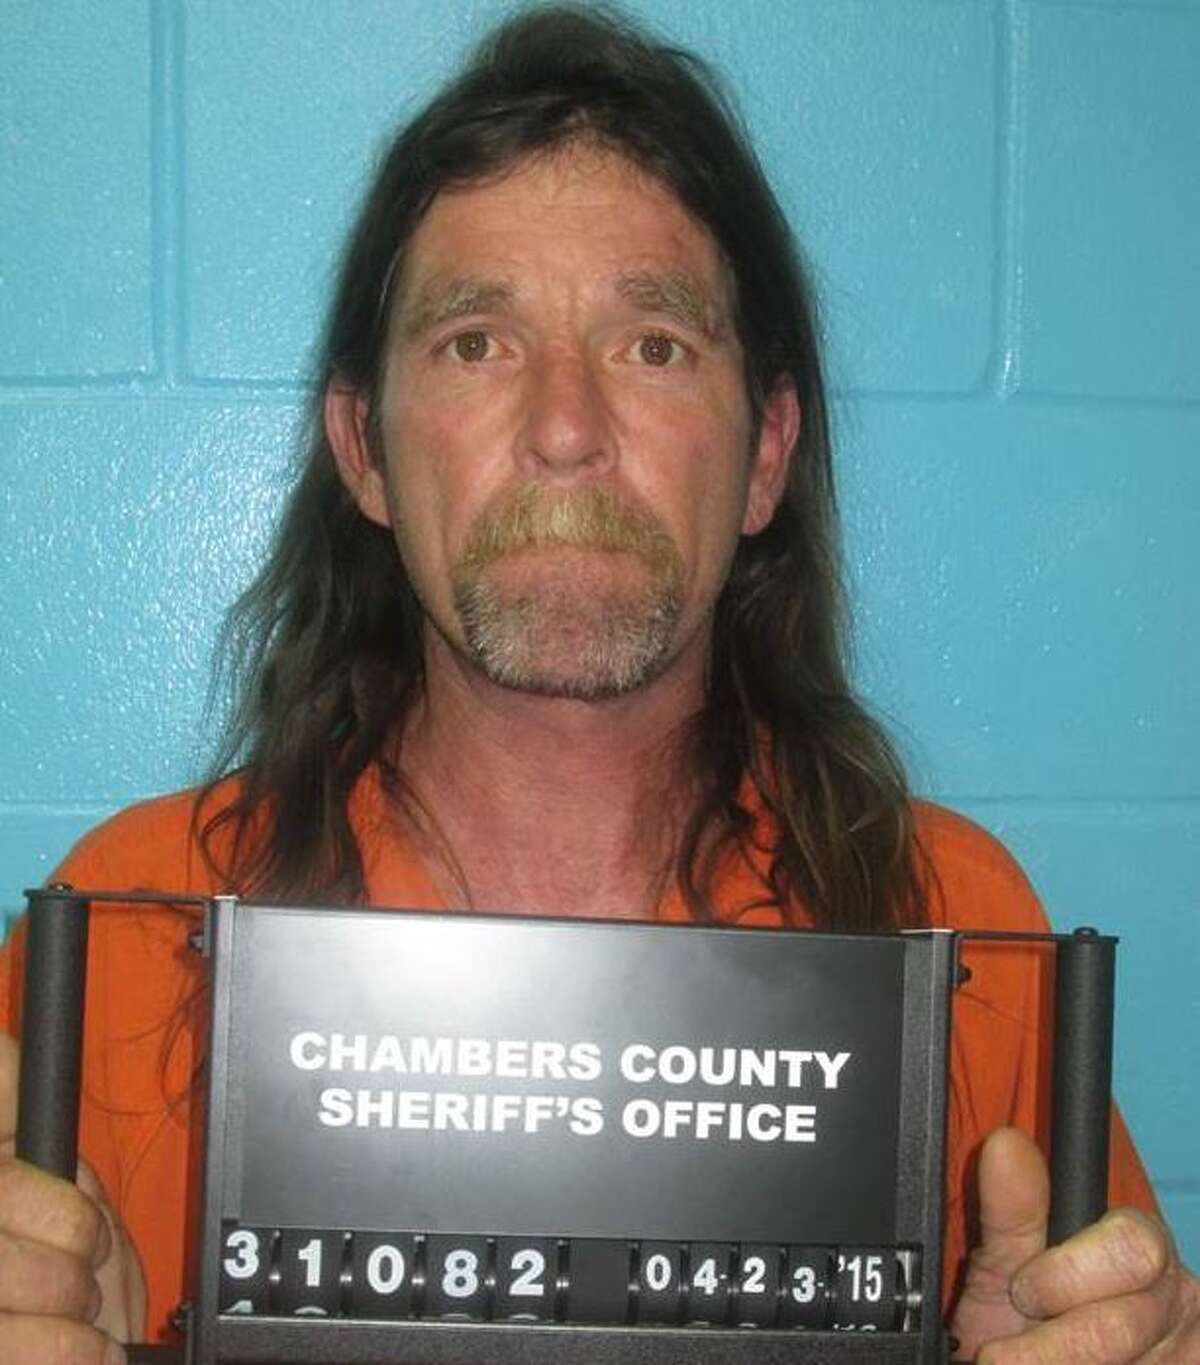 Chambers County Check On Sex Offenders Warrant Roundup